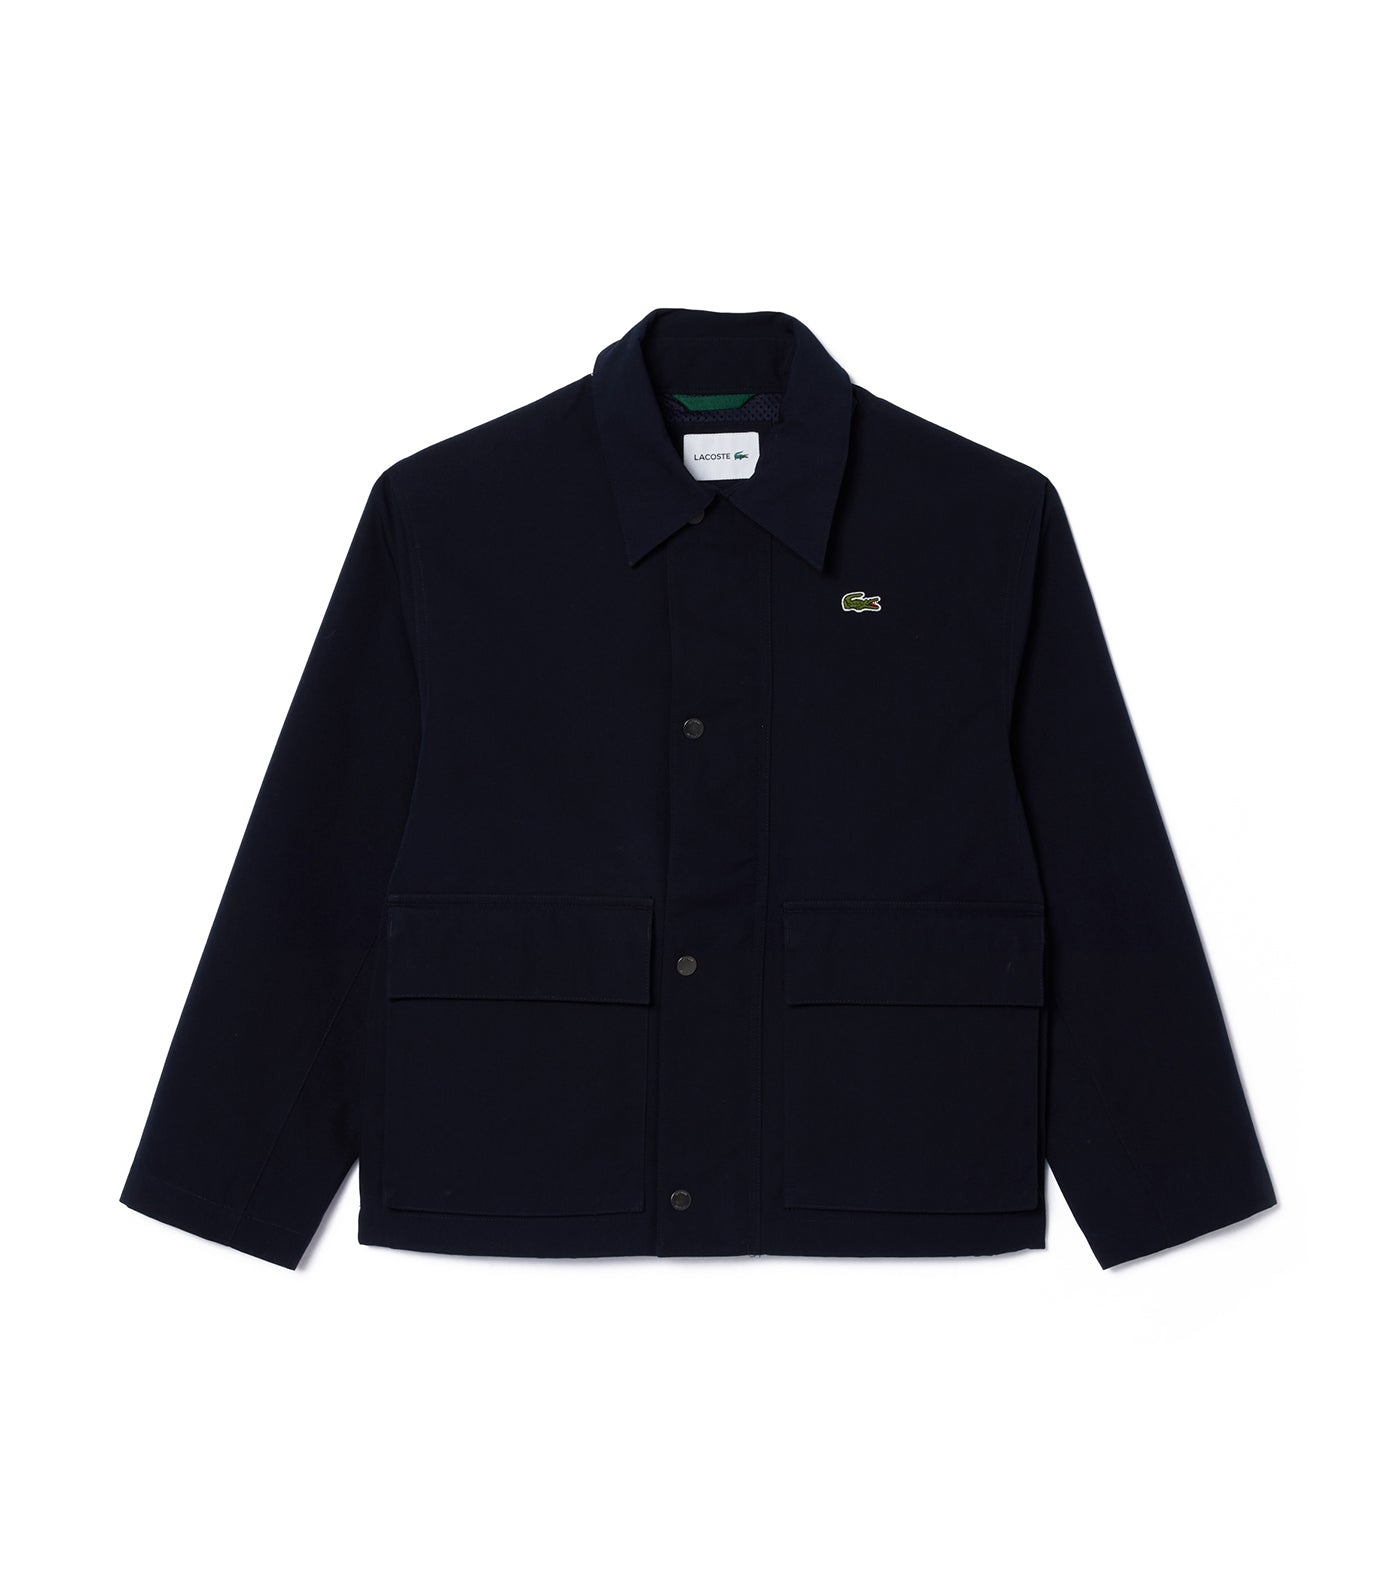 Lacoste Shirt Collar Functional Outerwear Abysm